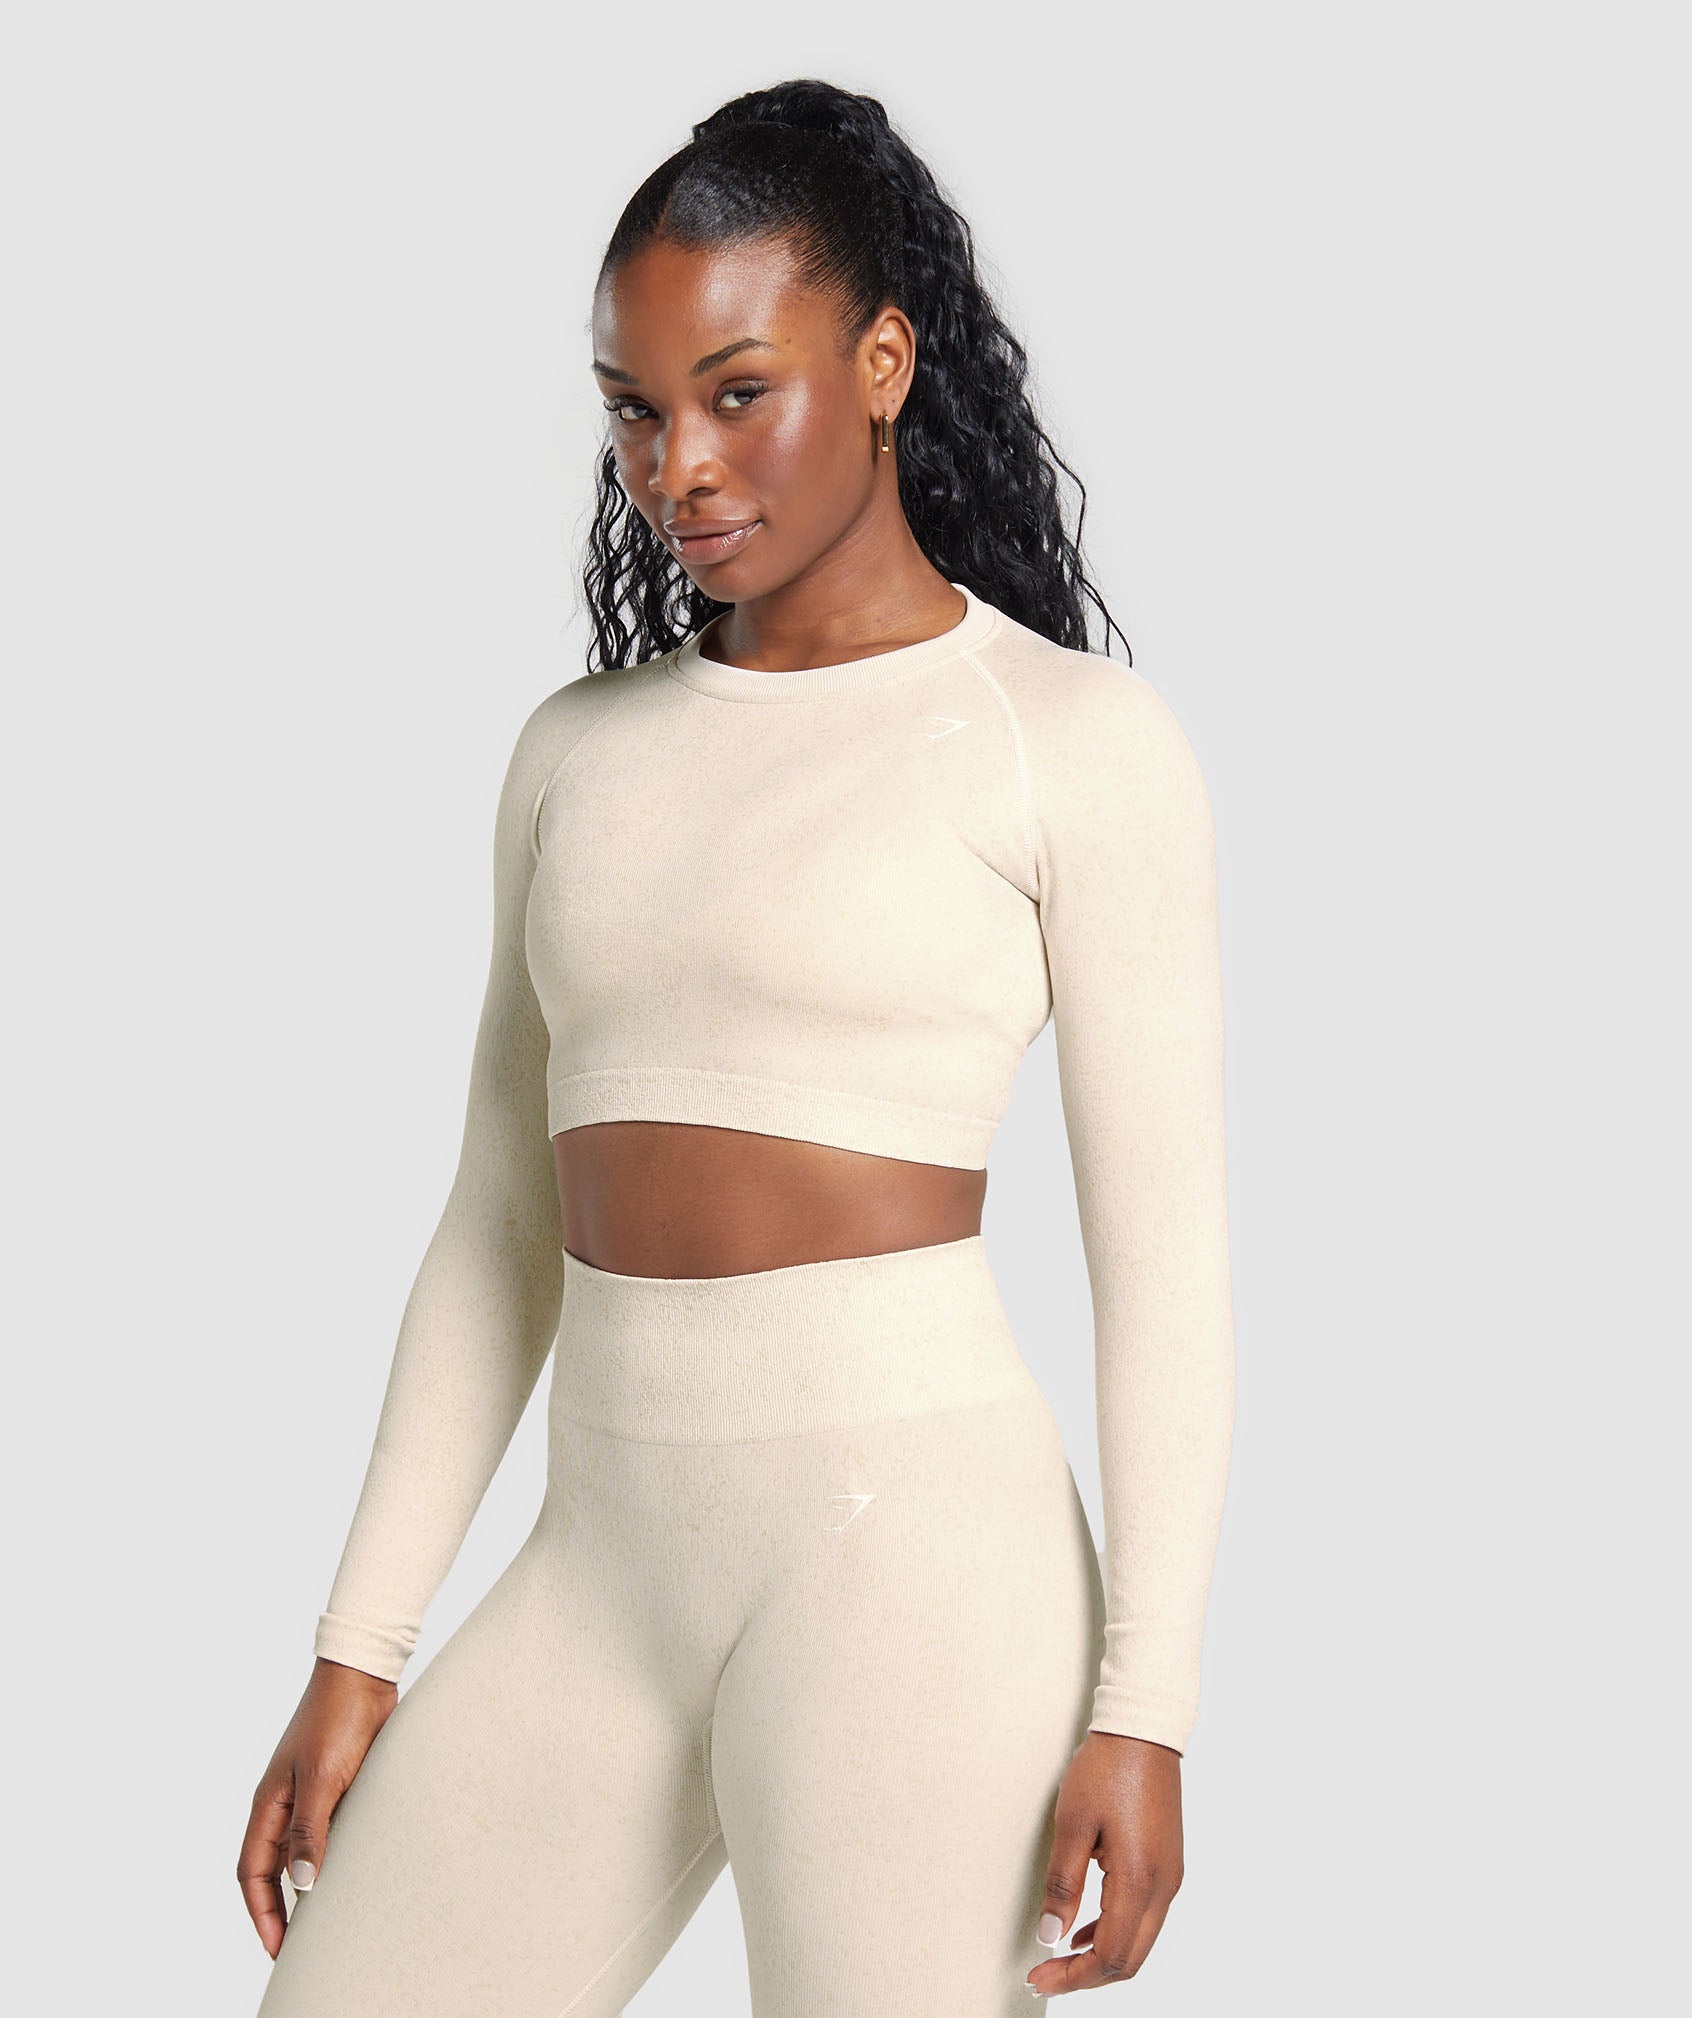 Adapt Fleck Seamless Long Sleeve Crop Top in Coconut White - view 3